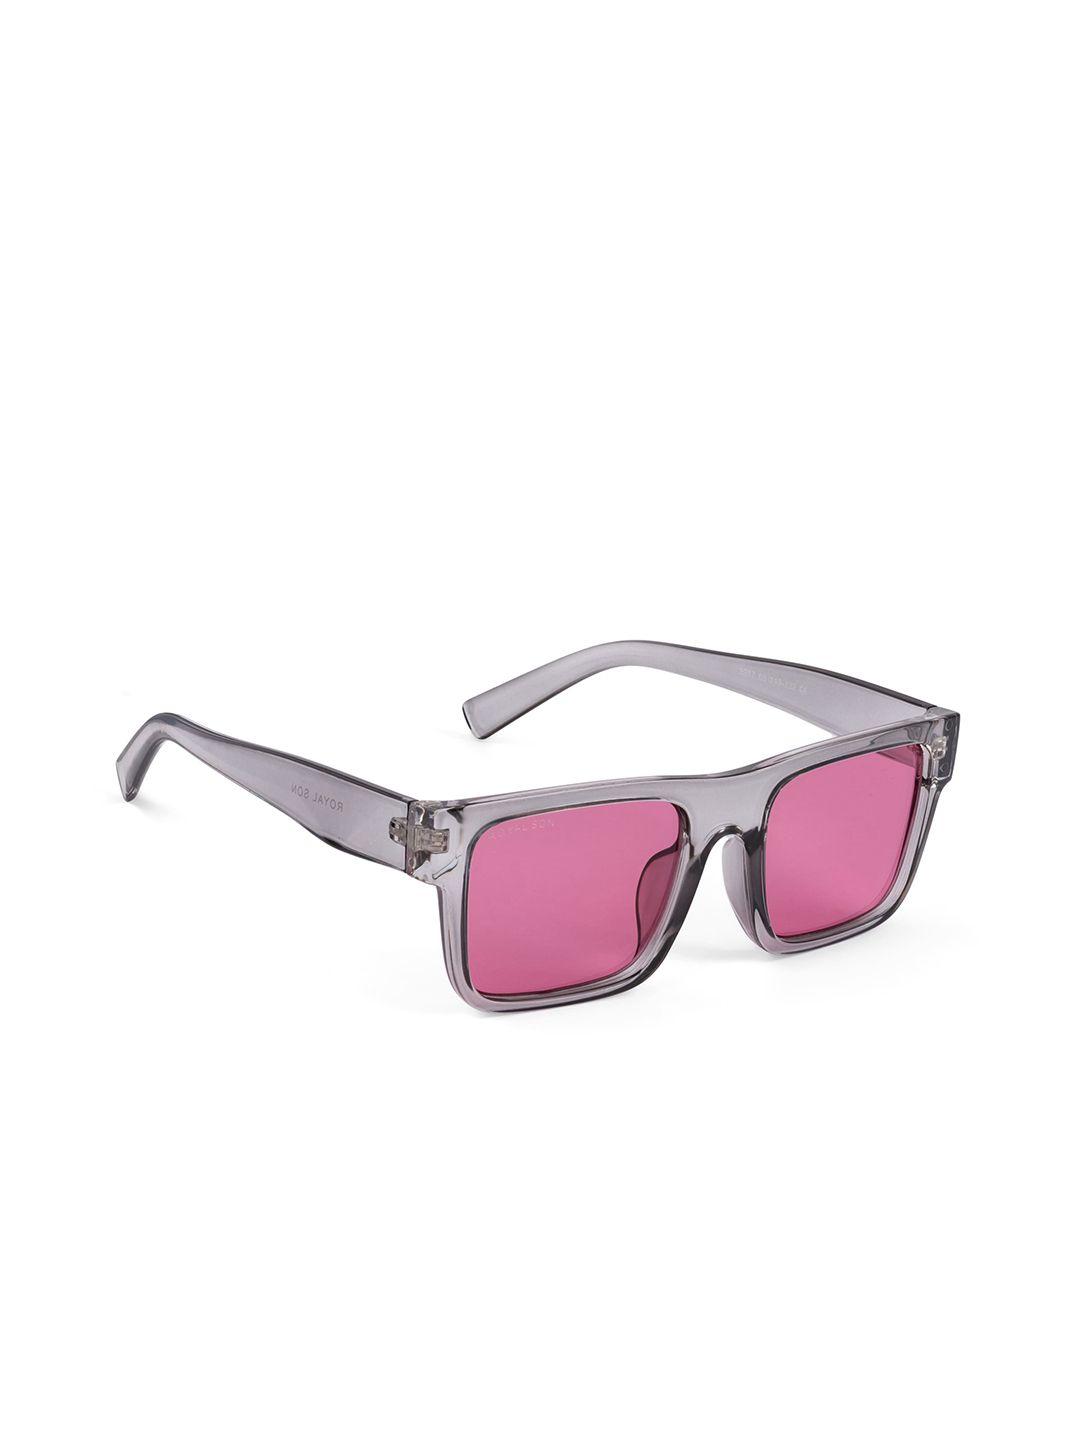 royal son women rectangle sunglasses with uv protected lens